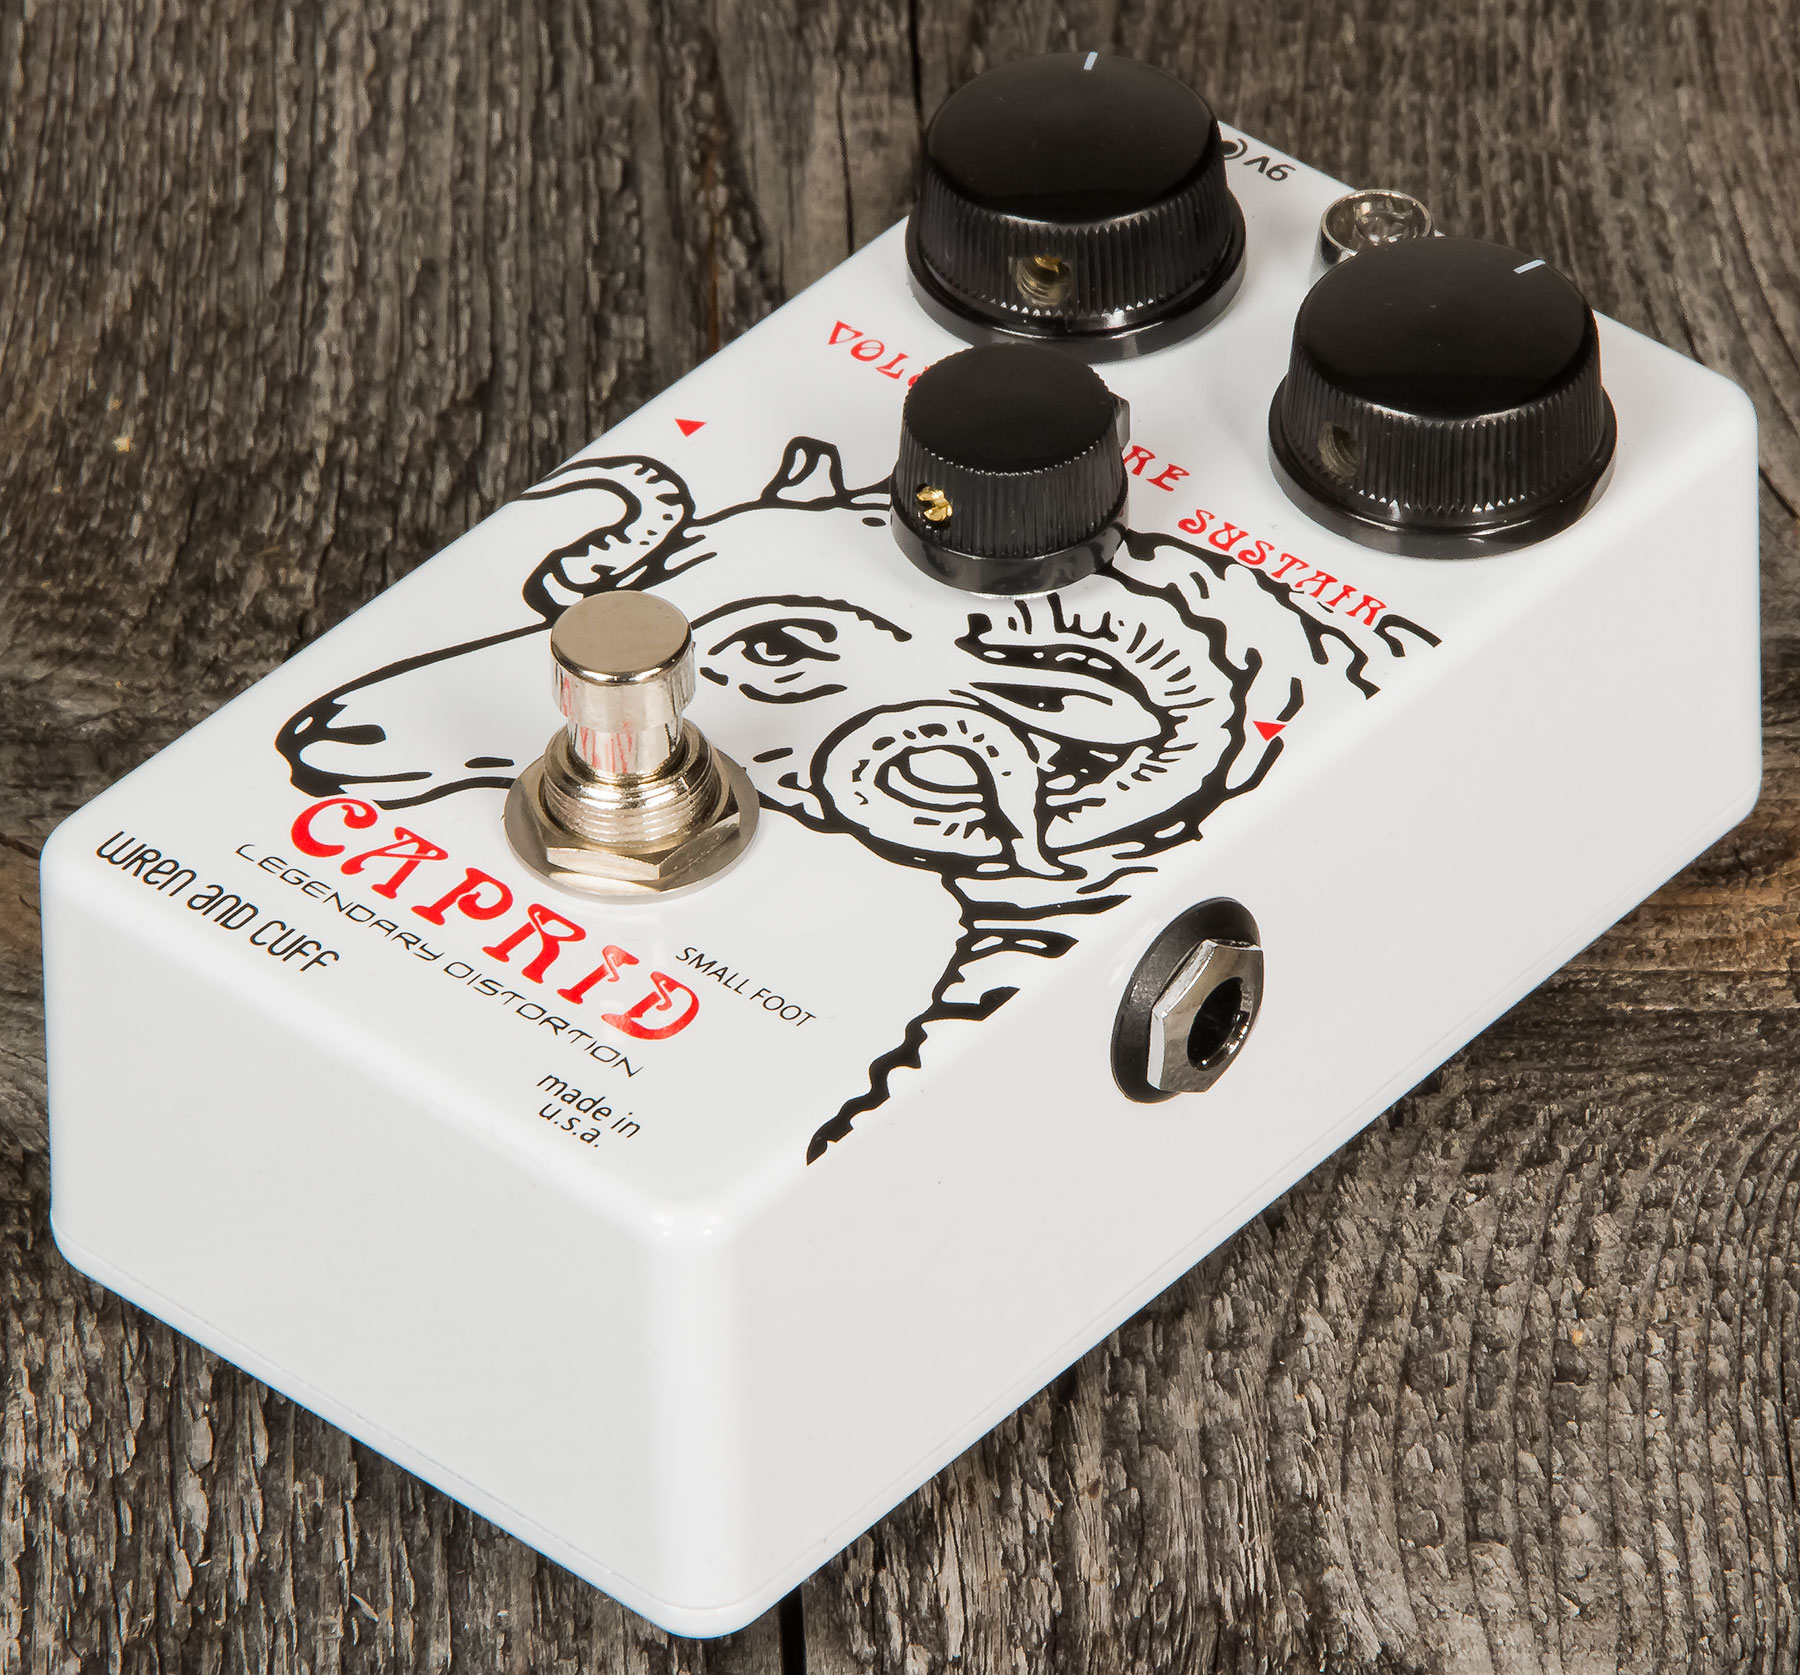 Wren and cuff Caprid Small Foot Legendary Distortion Overdrive